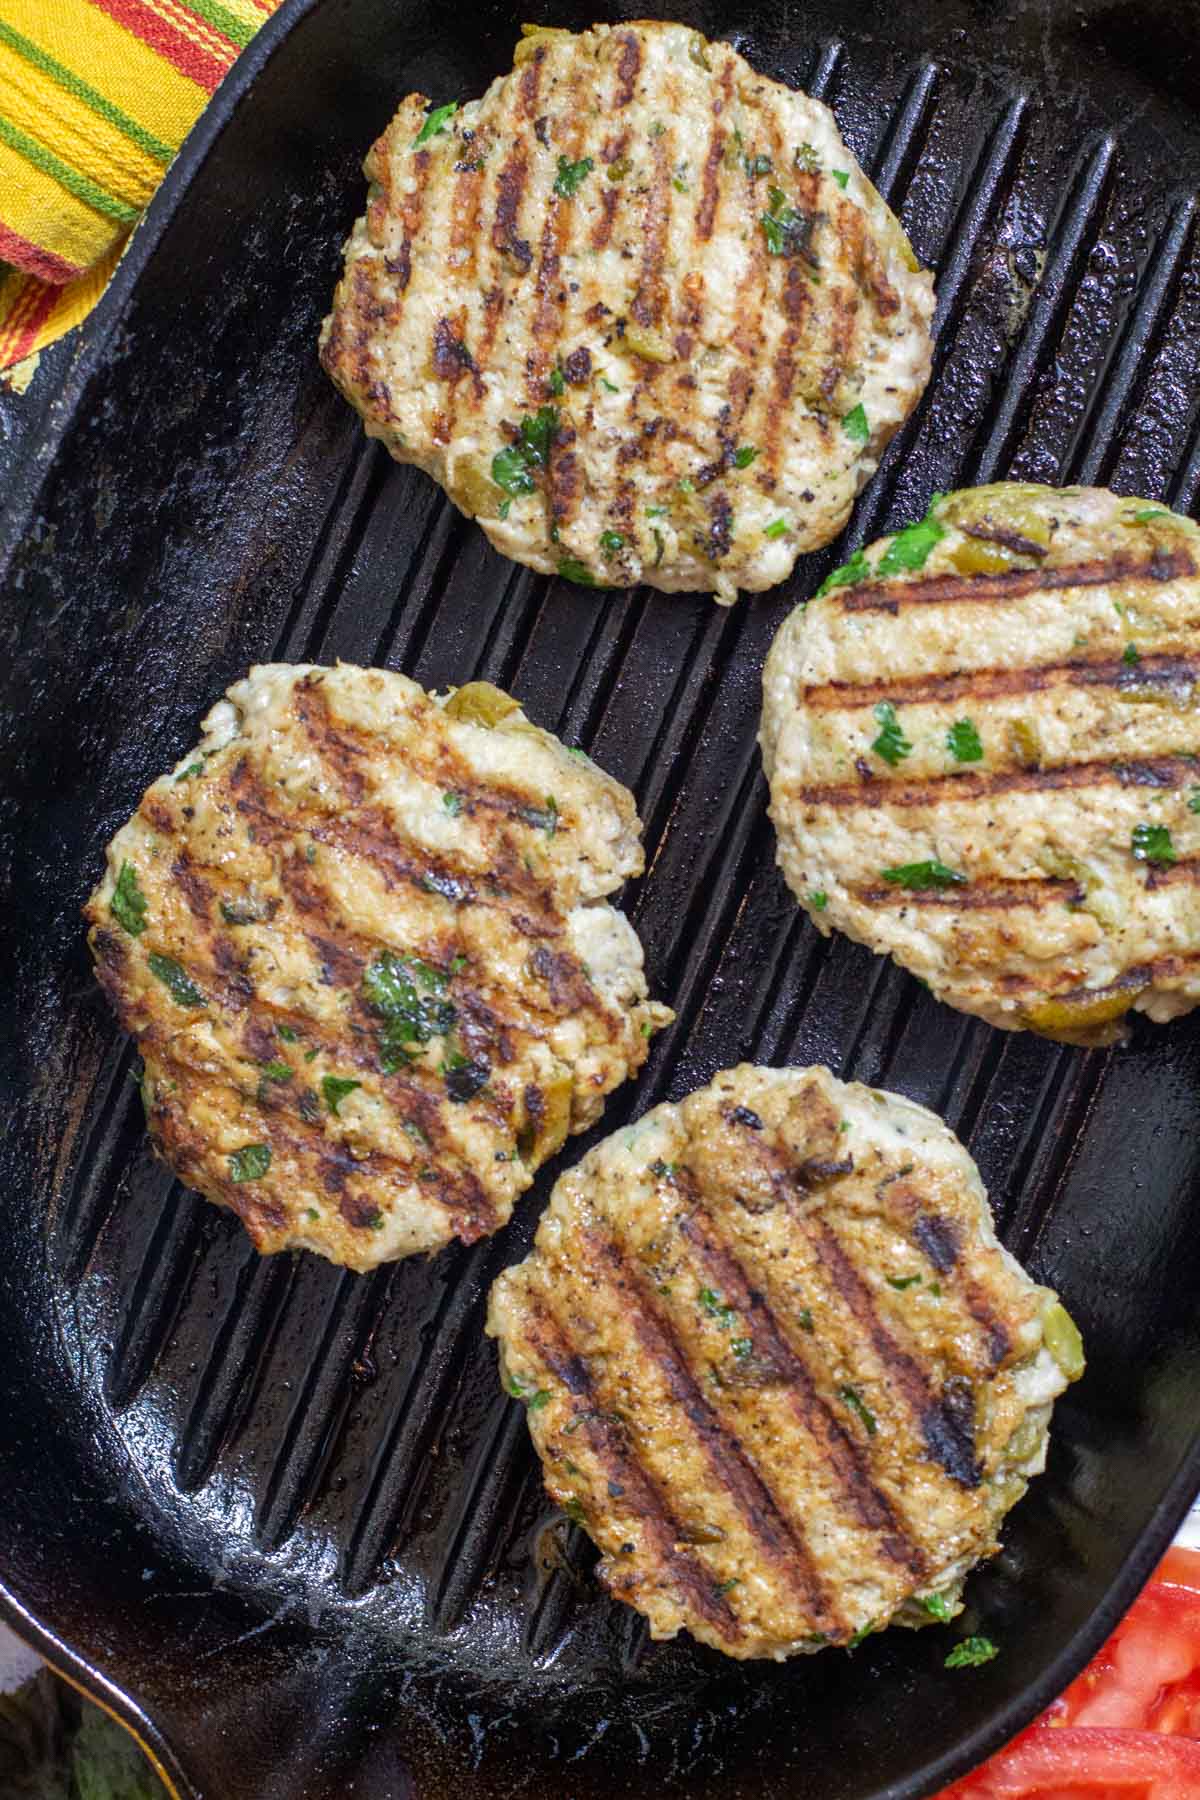 Cooking ground chicken patties stove top in a grill pan.